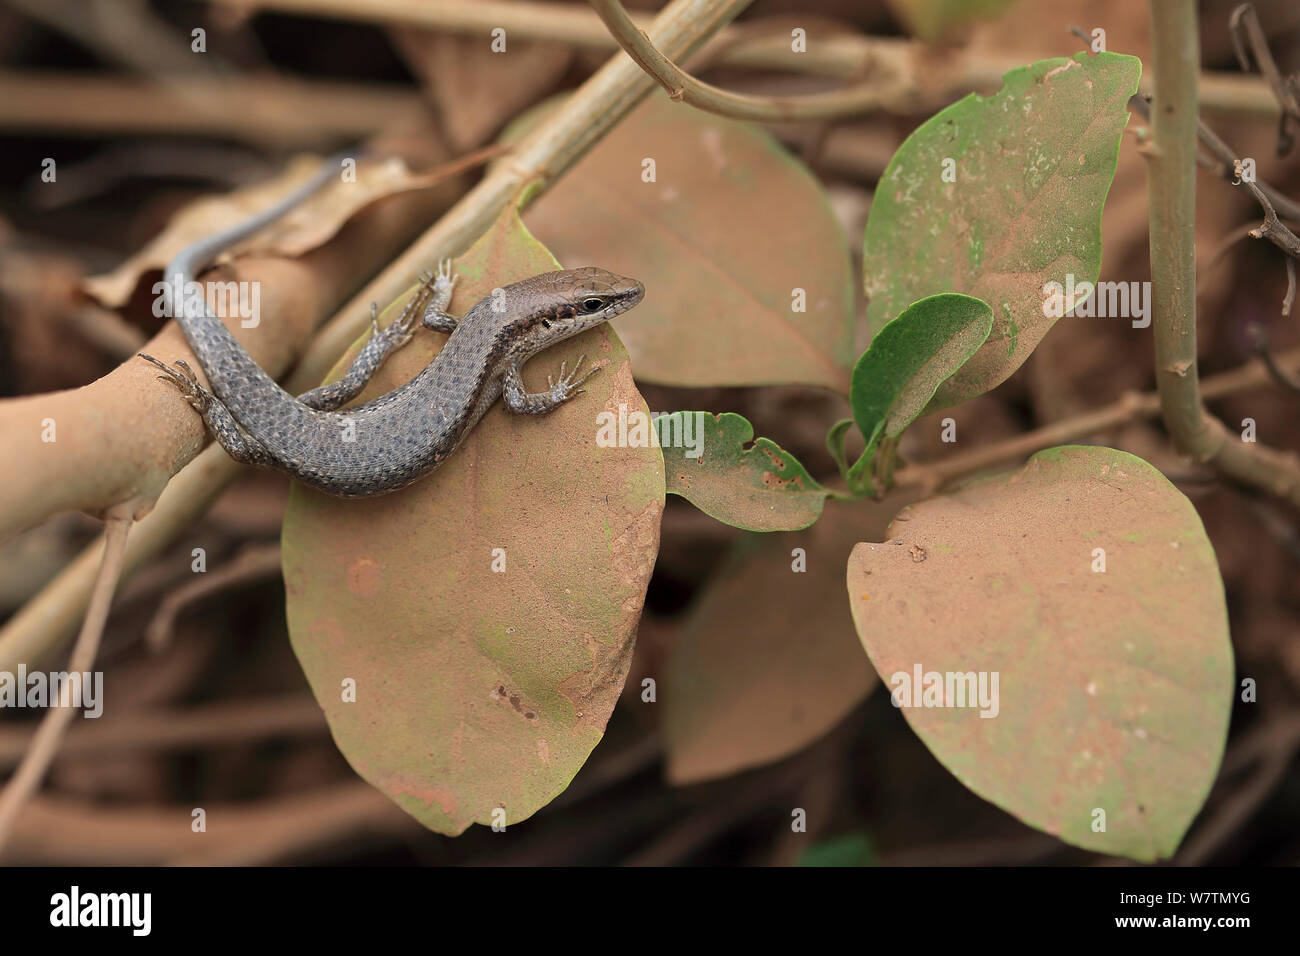 Brown-flanked Skink (Mabuya affinus) Western Division, The Gambia, January. Stock Photo